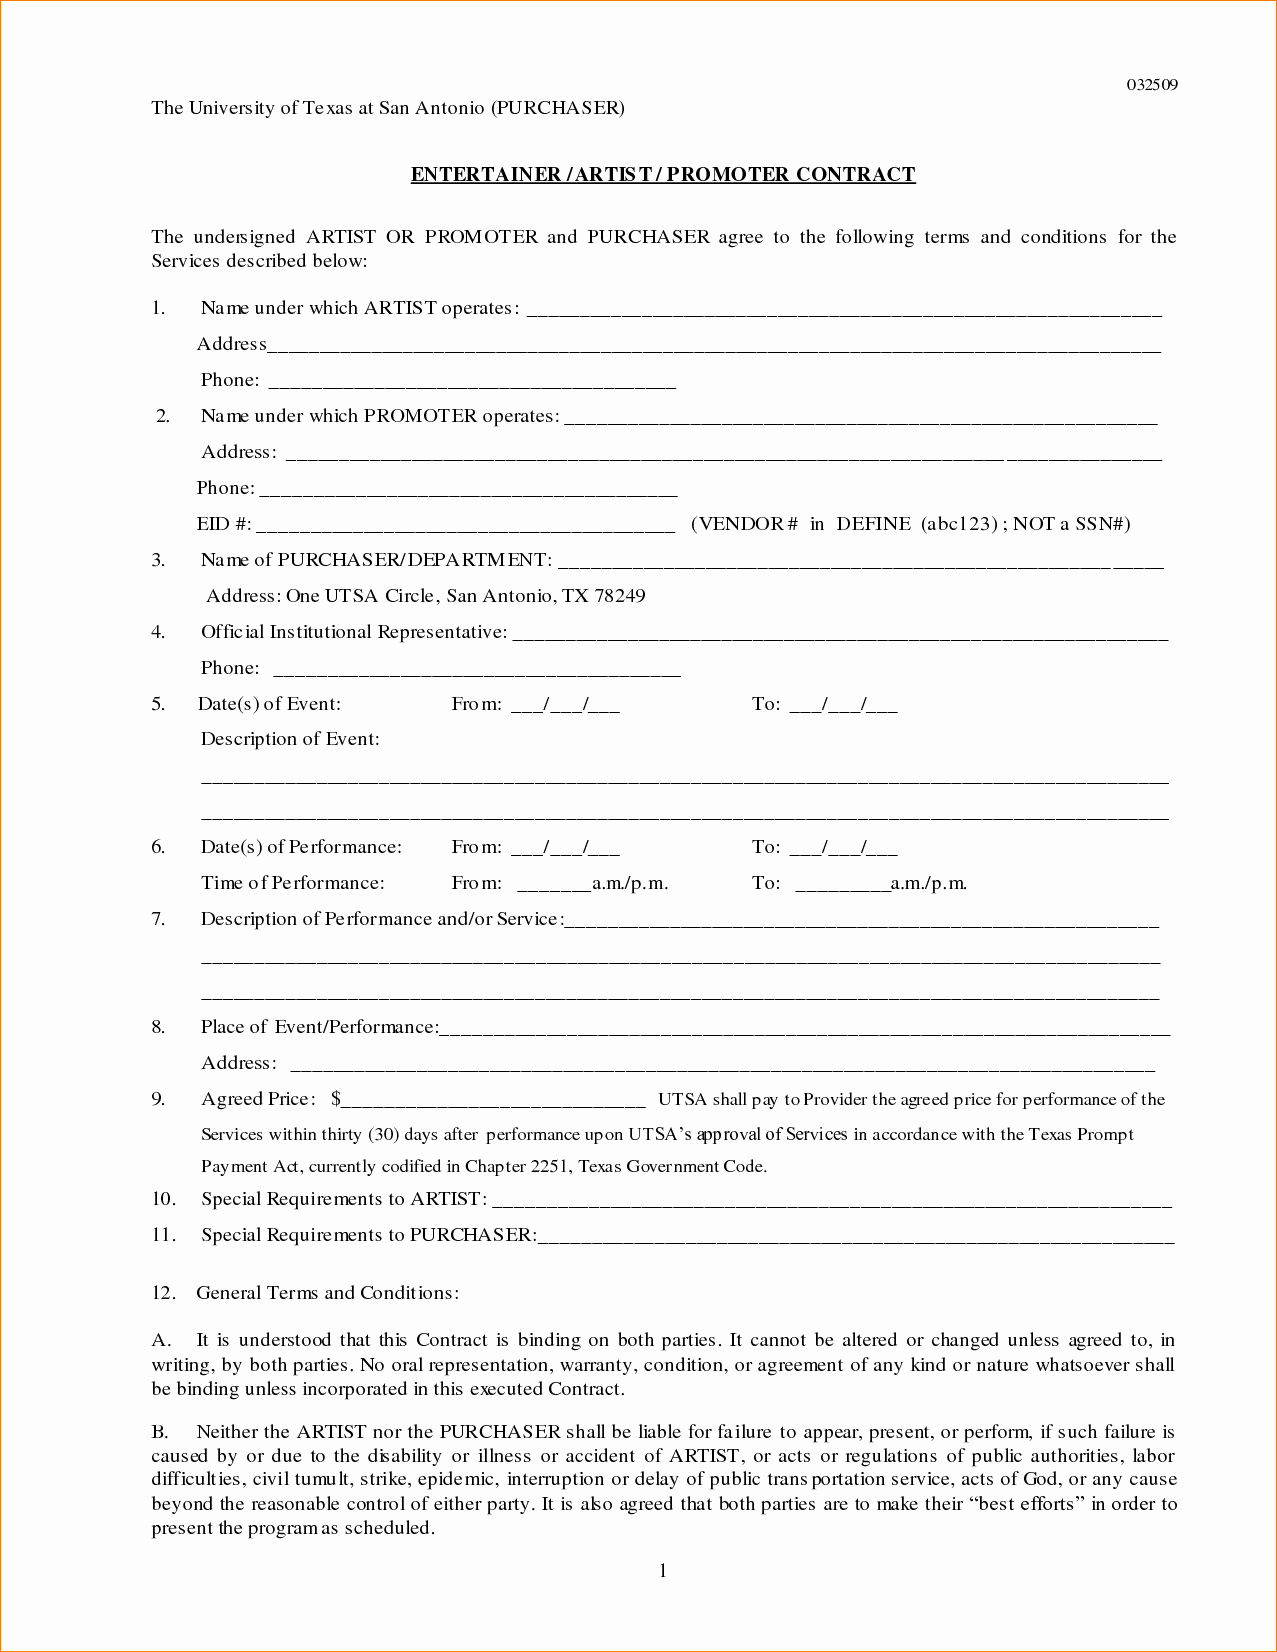 artist contract template